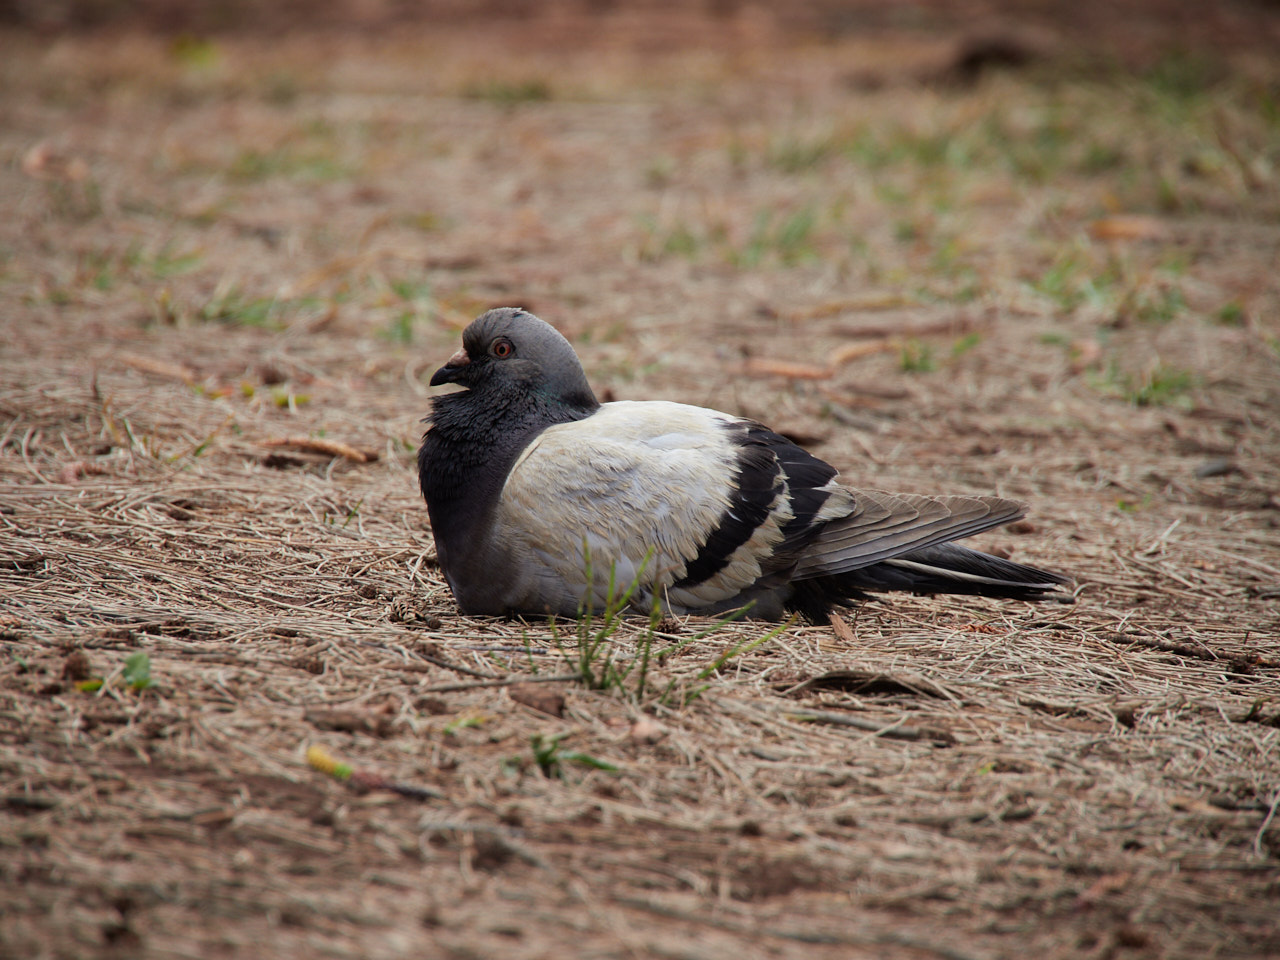 A dove (I believe) of some species I have been unable to identify, nesting near the park.